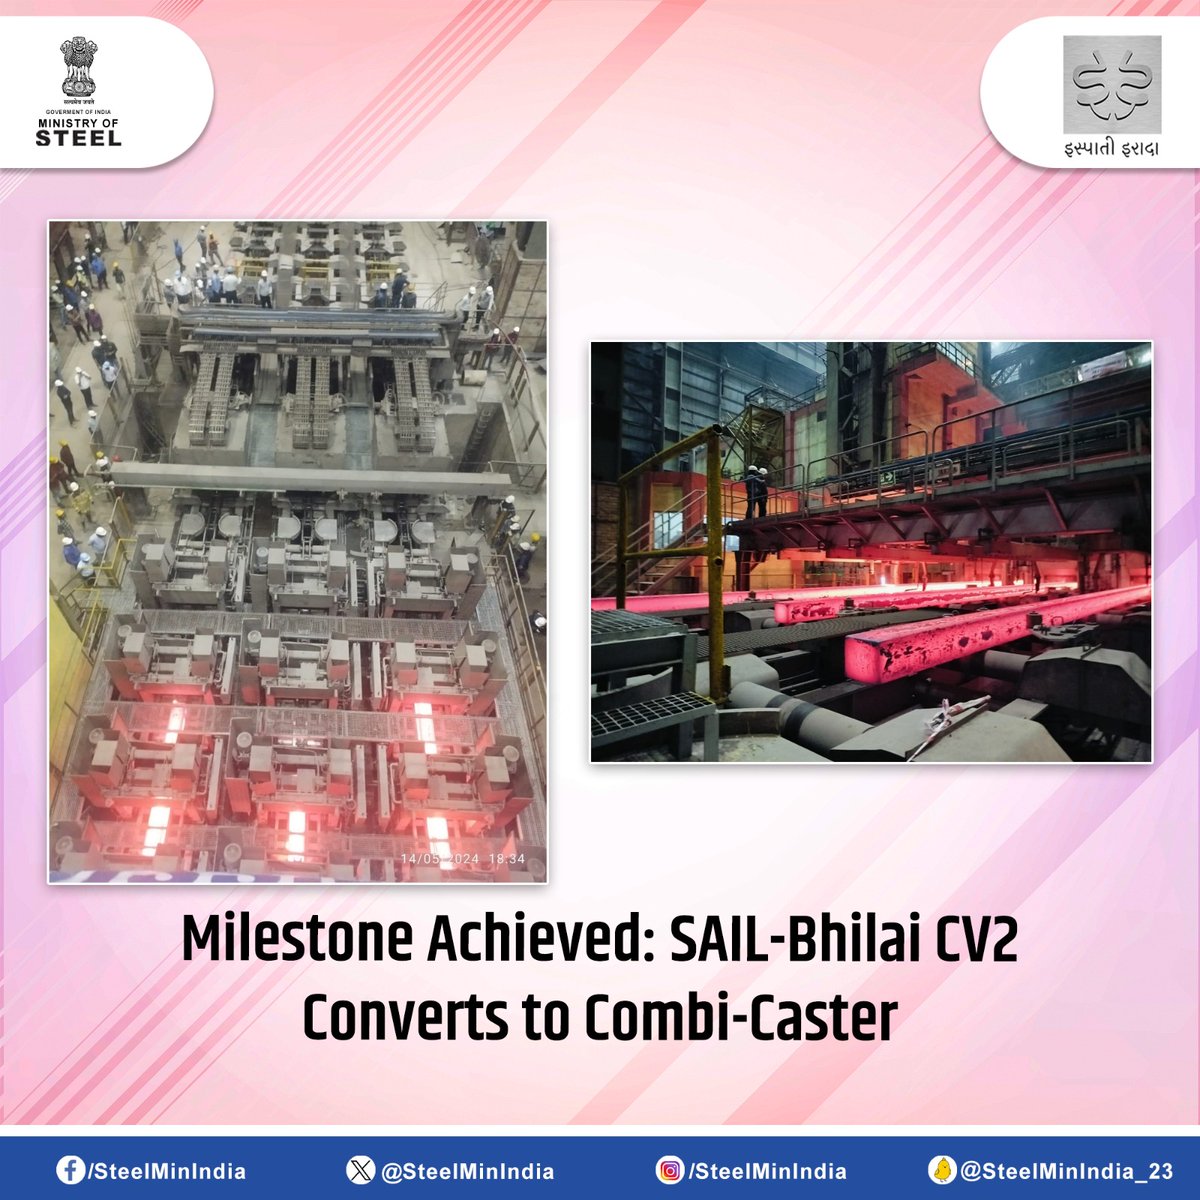 SMS 3 of #SAIL-#BhilaiSteelPlant achieves a milestone with the successful conversion of CV2 to a combi-caster, producing its first heat of blooms on 14th May 2024. #SteelIndustry #Milestone